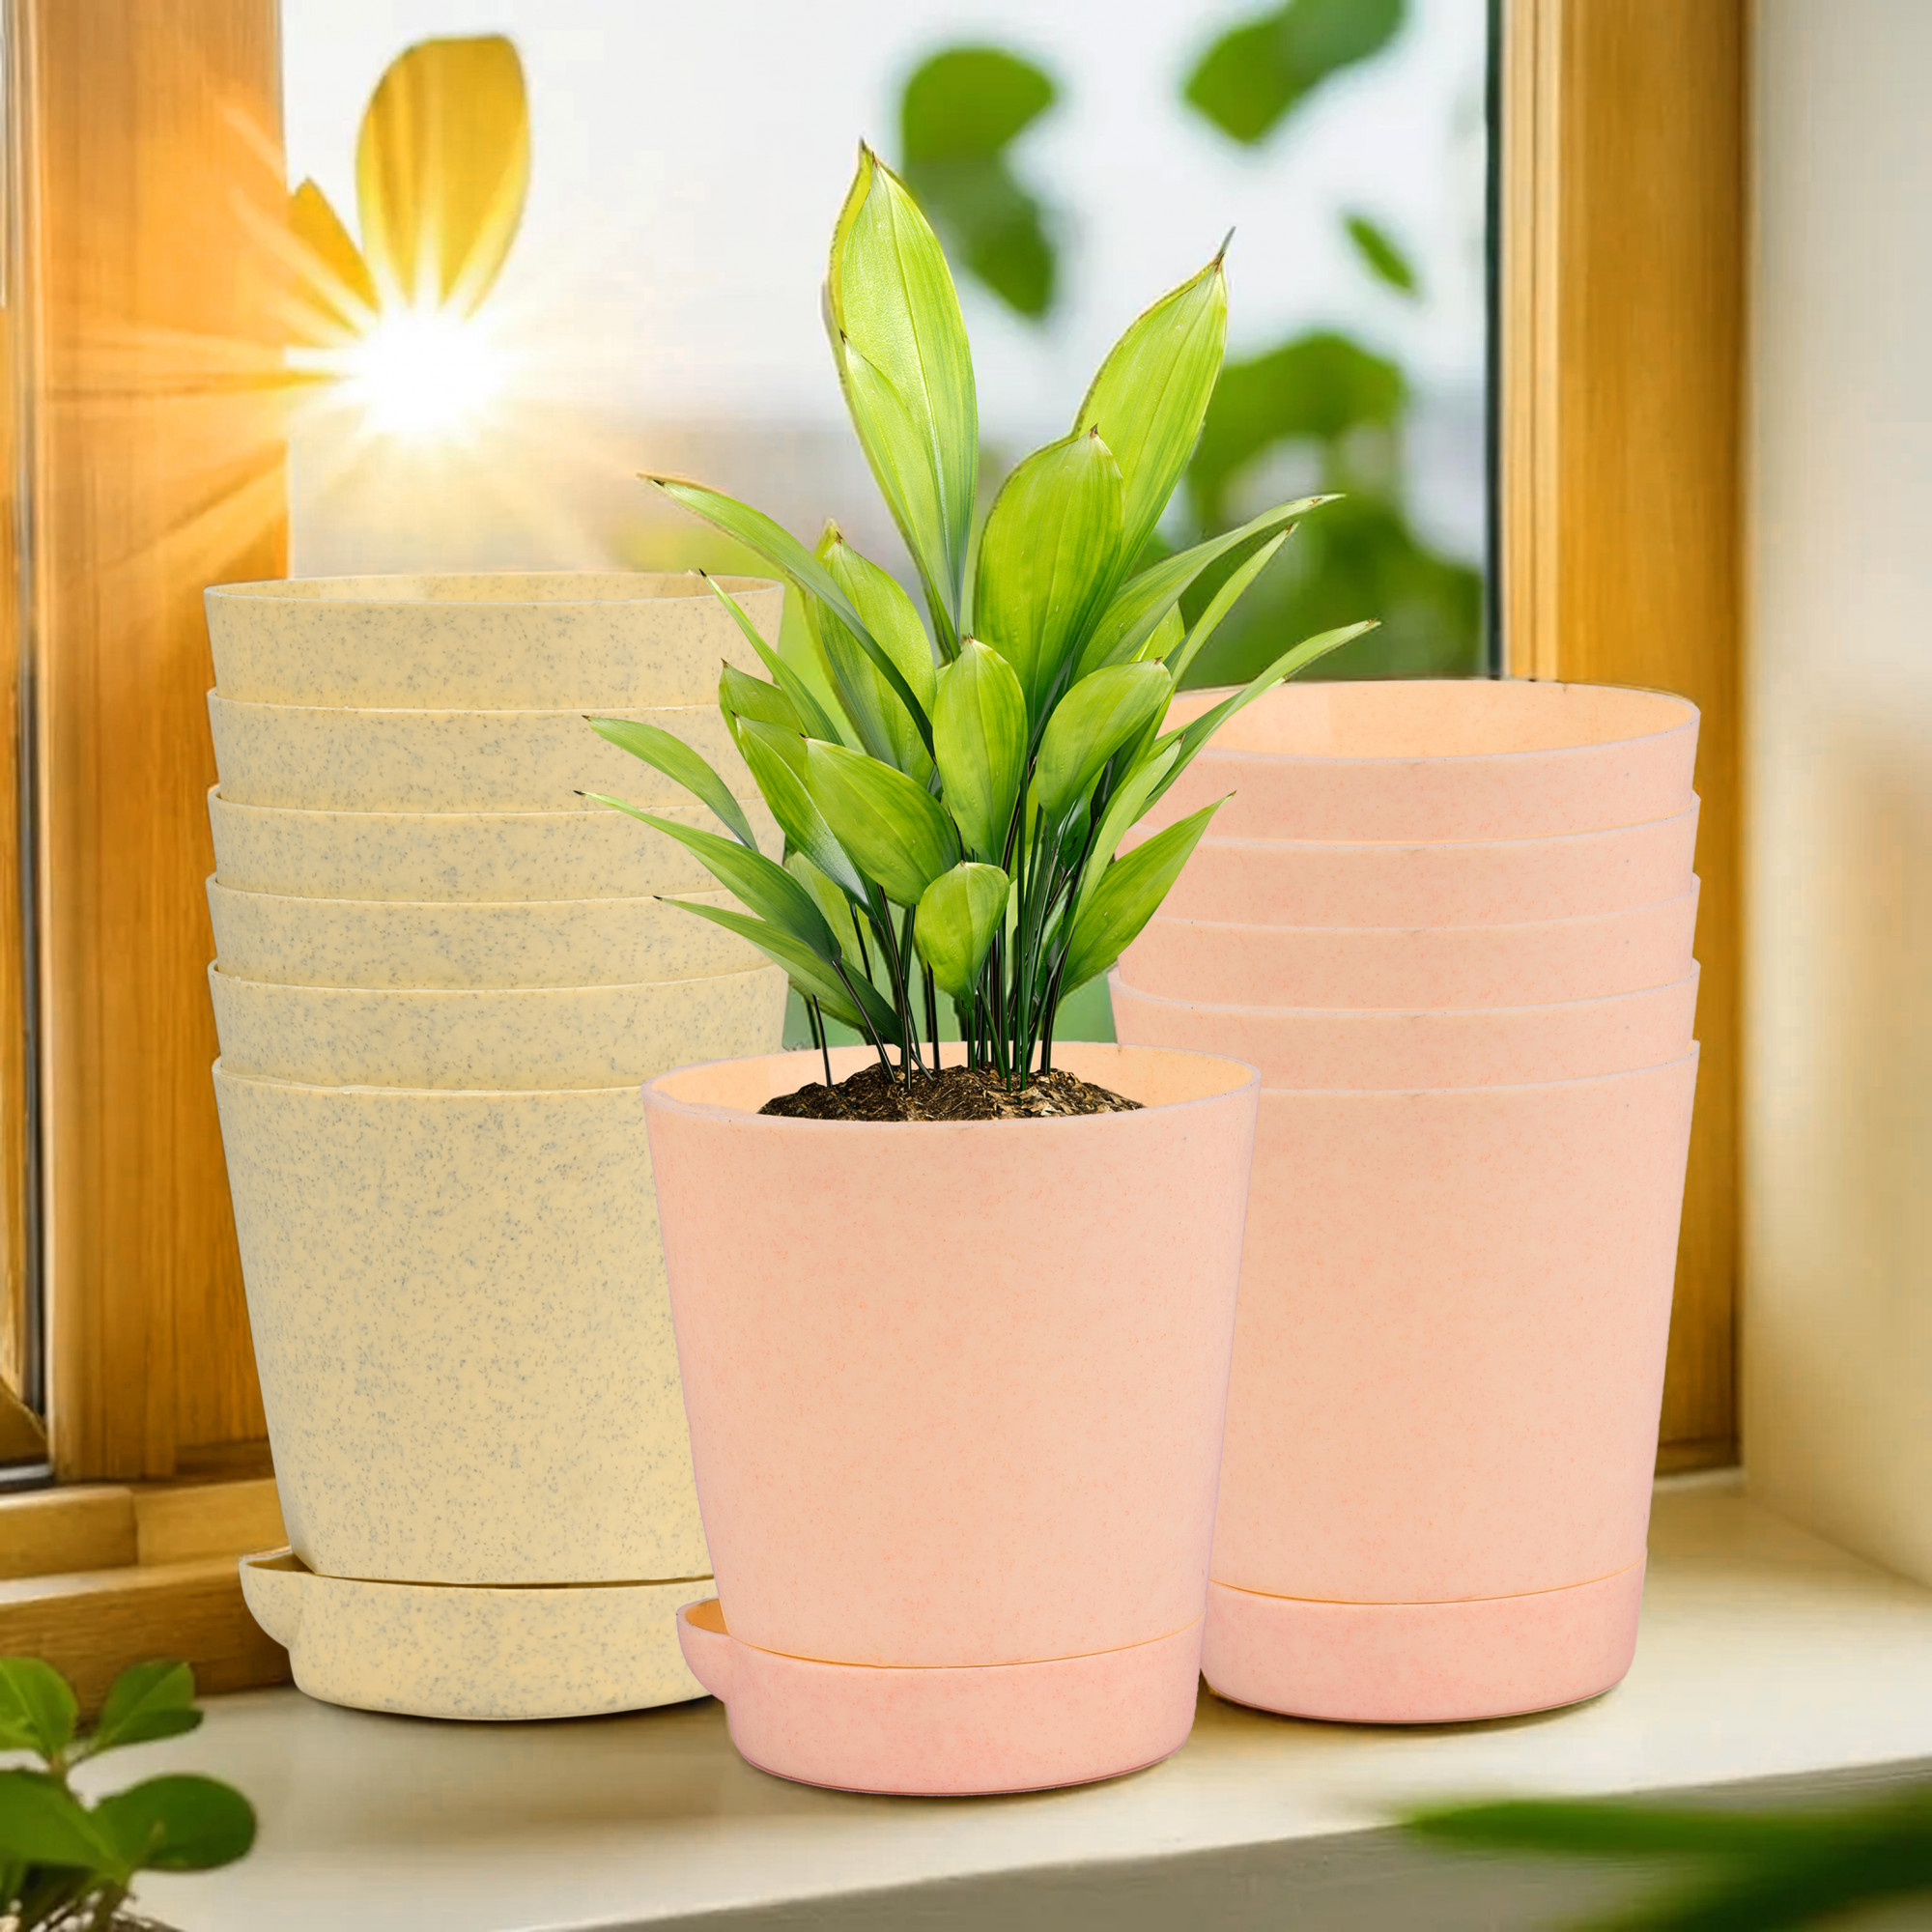 Kuber Industries Flower Pot | Flower Pot for Living Room-Office | Planters for Home-office-Lawns & Garden Décor | Self Watering Flower Planters Pots | Marble Titan | 4 Inch | Beige & Peach